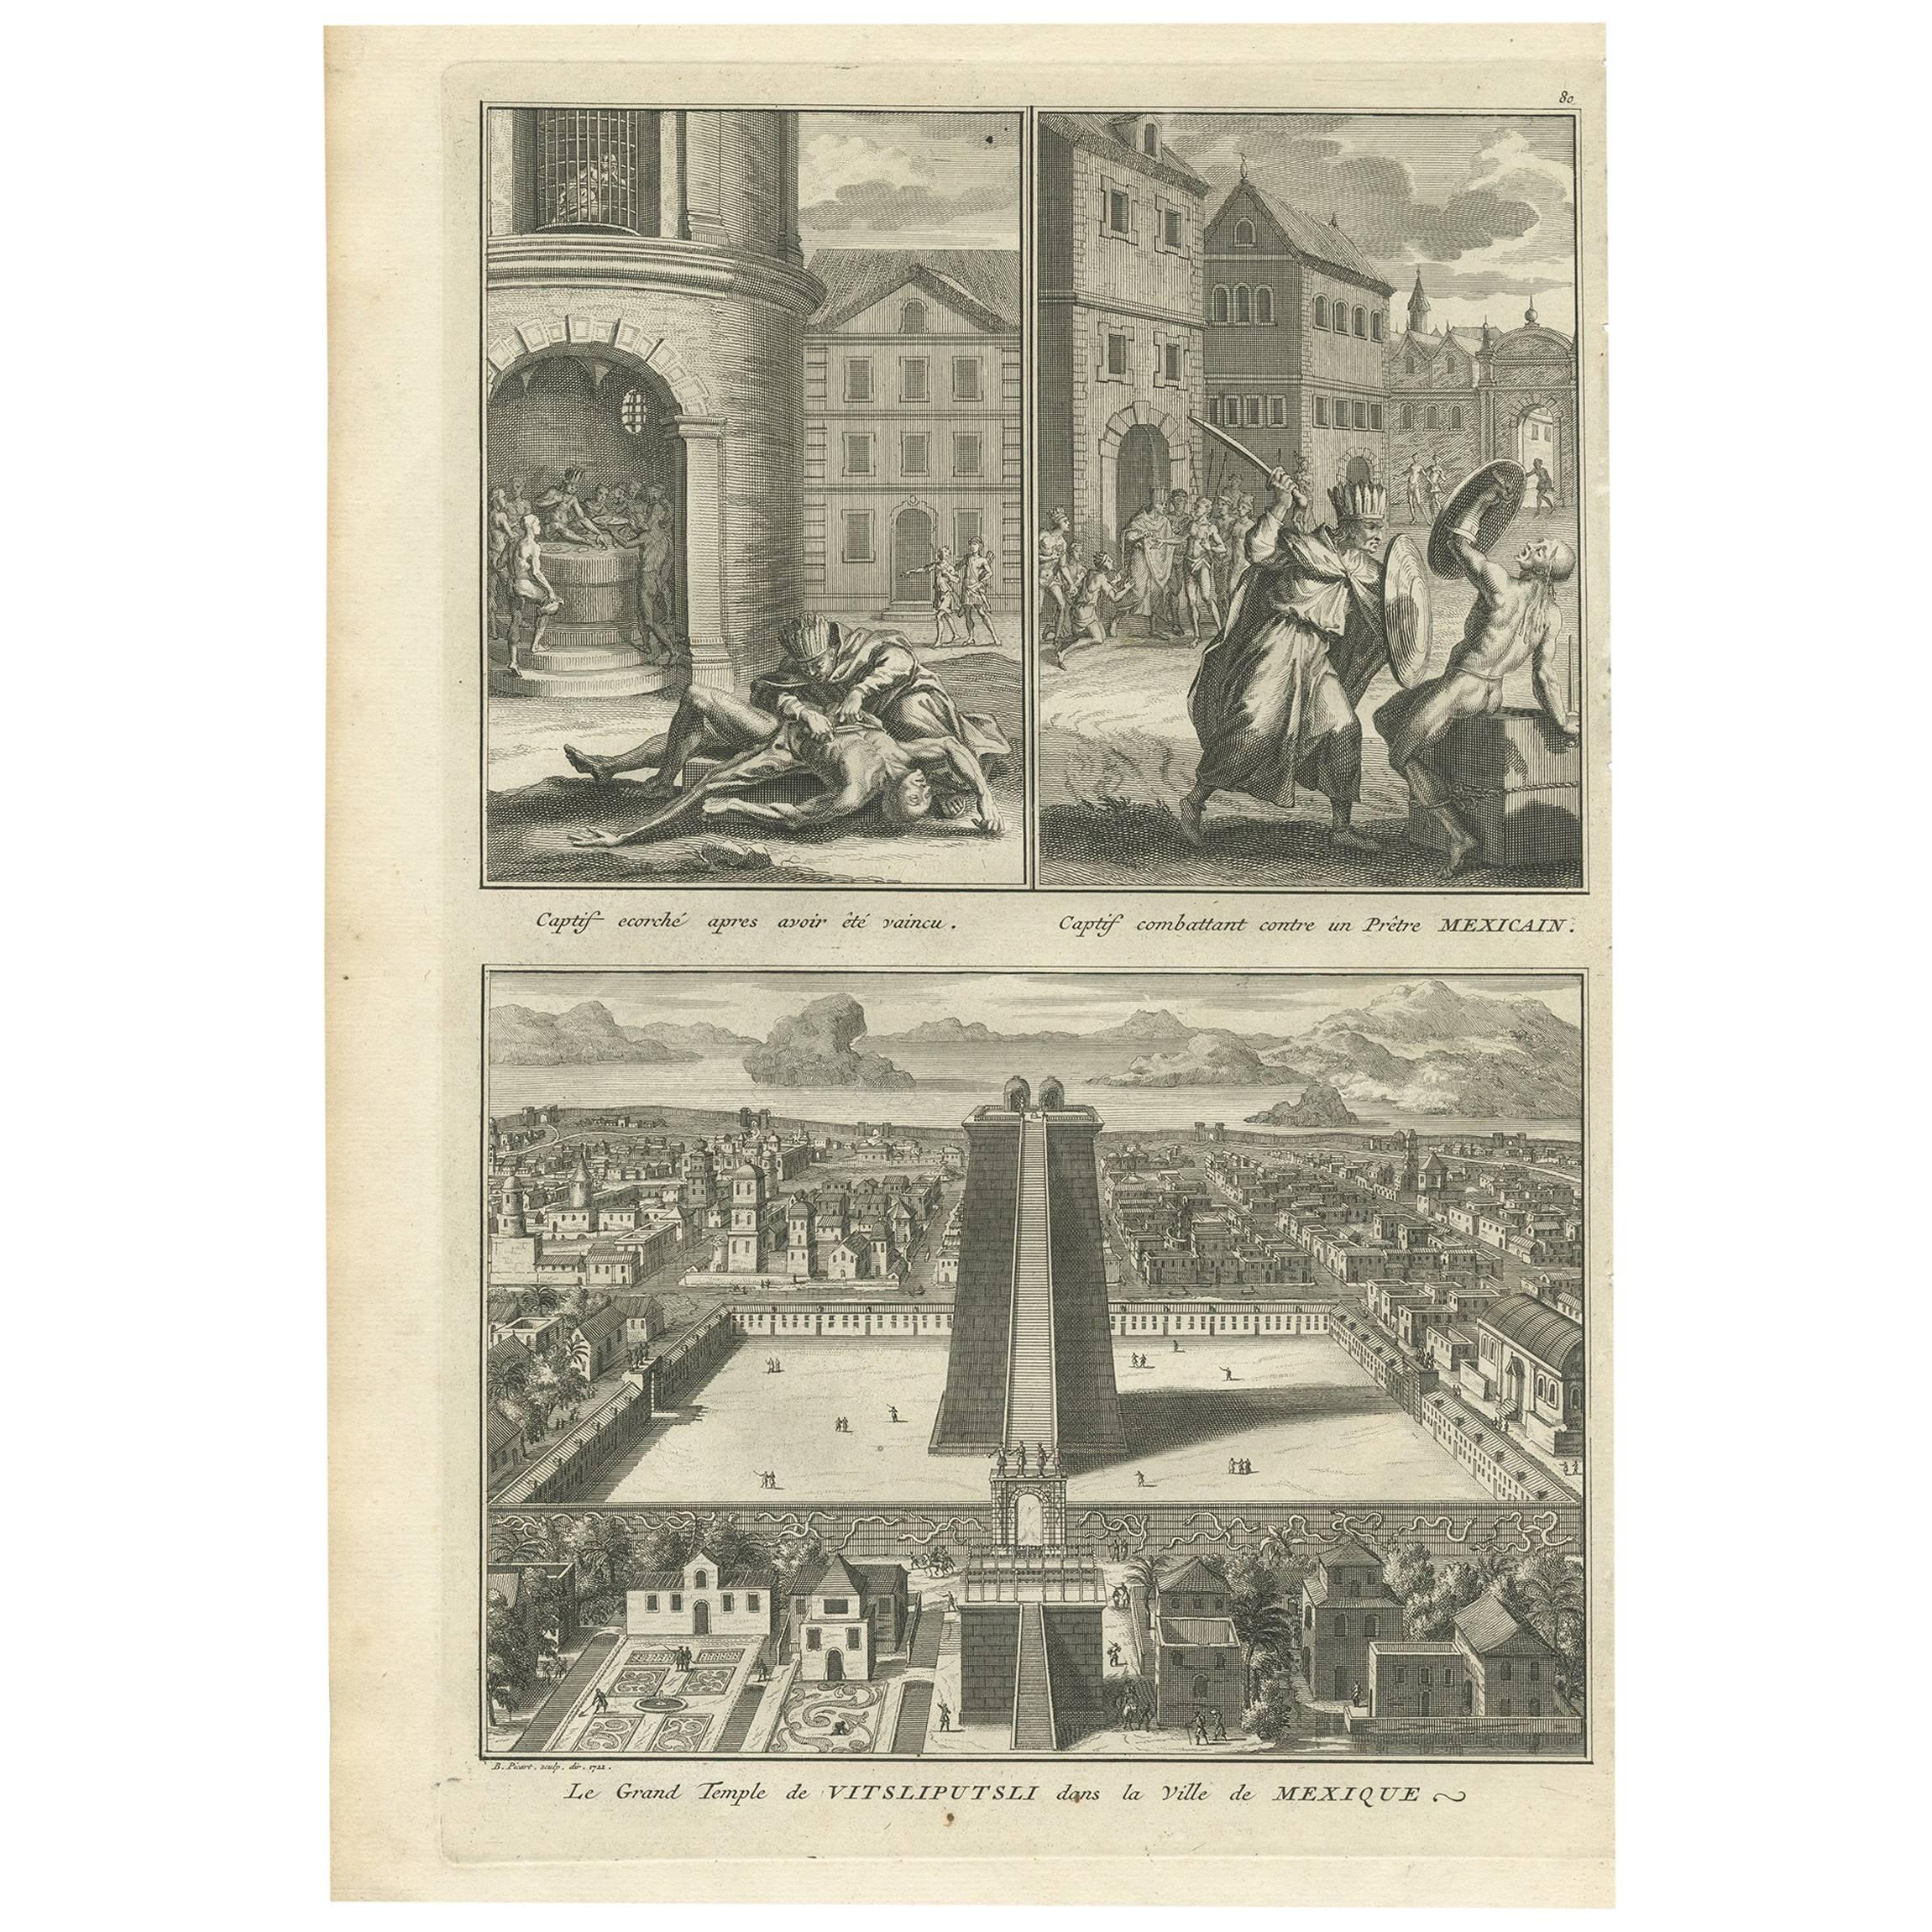 Antique Print of Captives and the Great Temple of Vitsliputsli "Mexico" For Sale